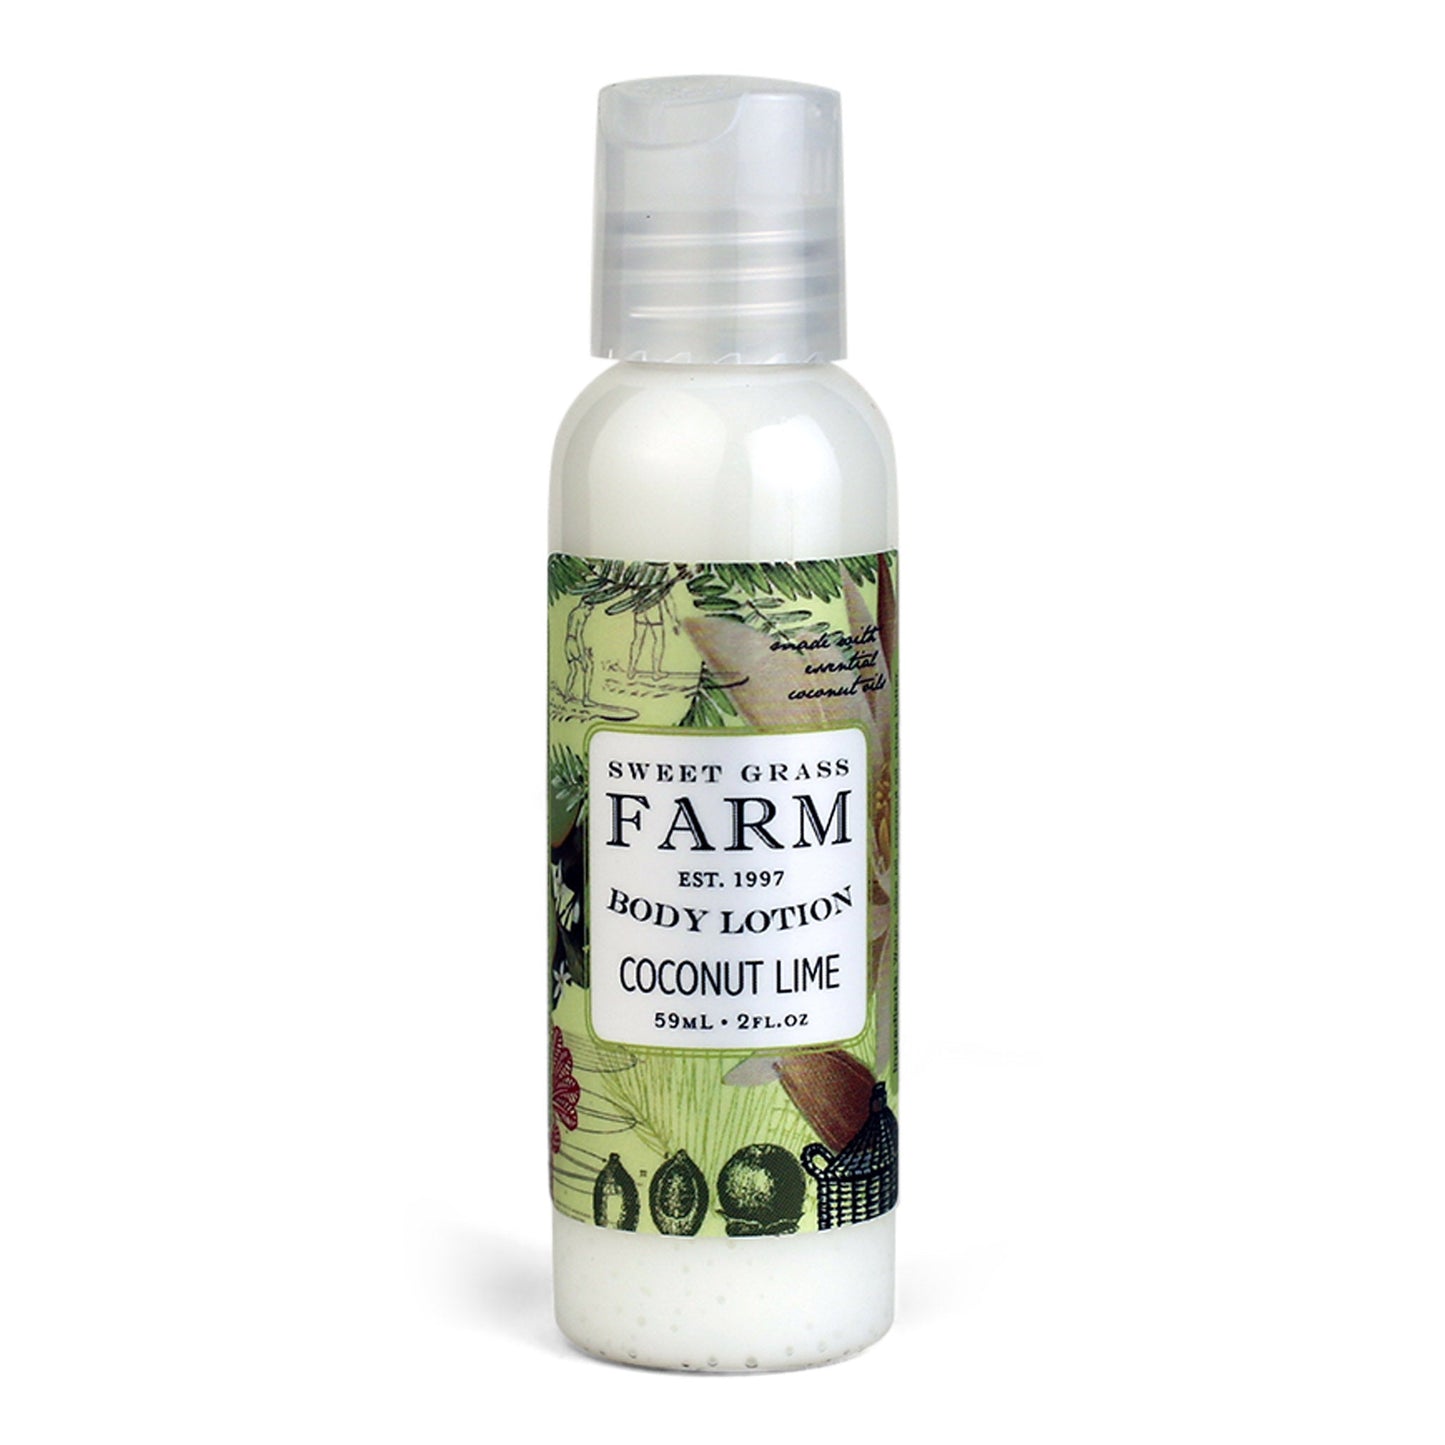 Mini Lotion with Wildflower Extracts